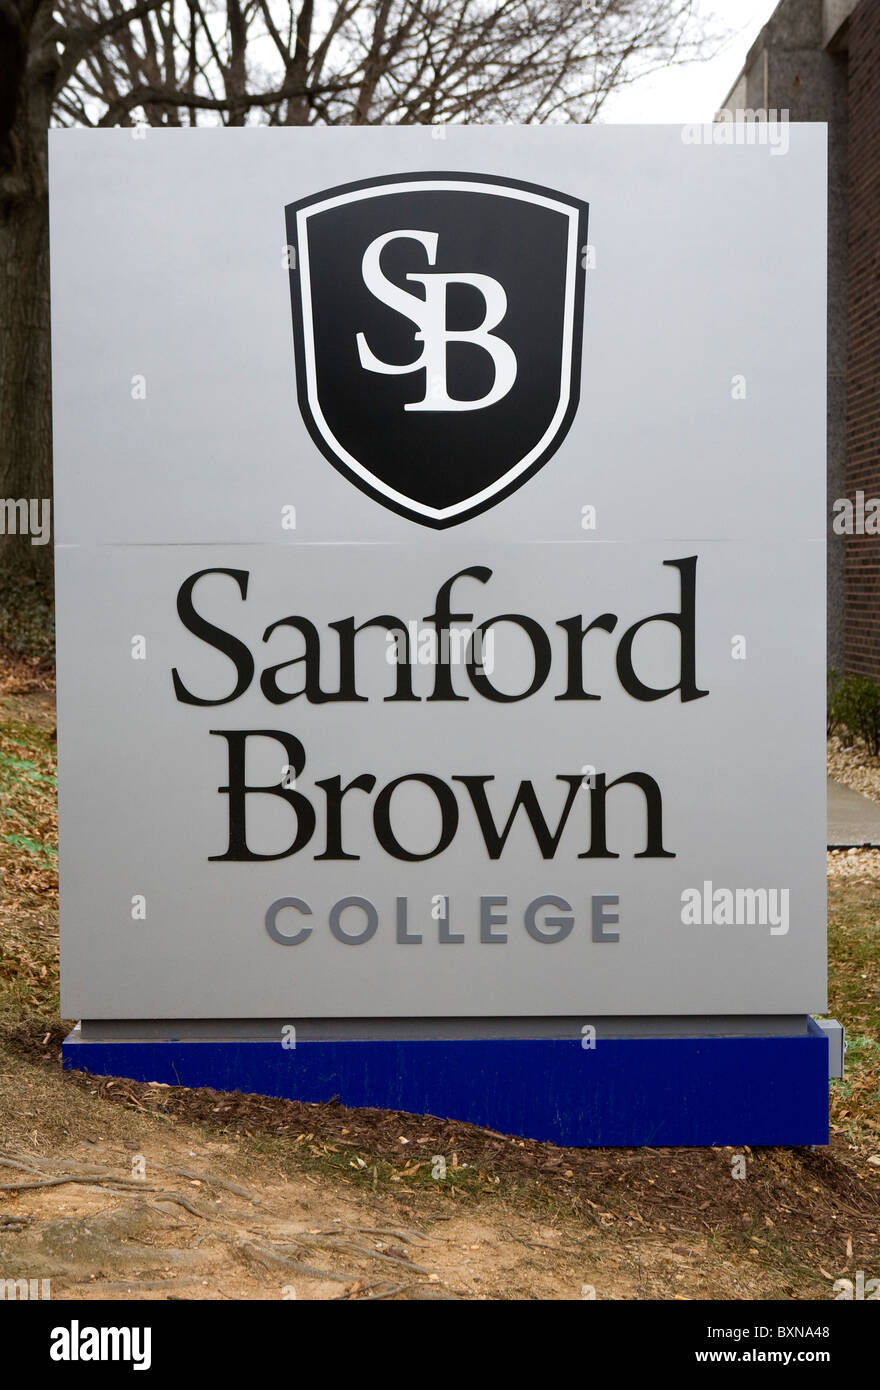 A Sanford Brown for-profit college.  Stock Photo